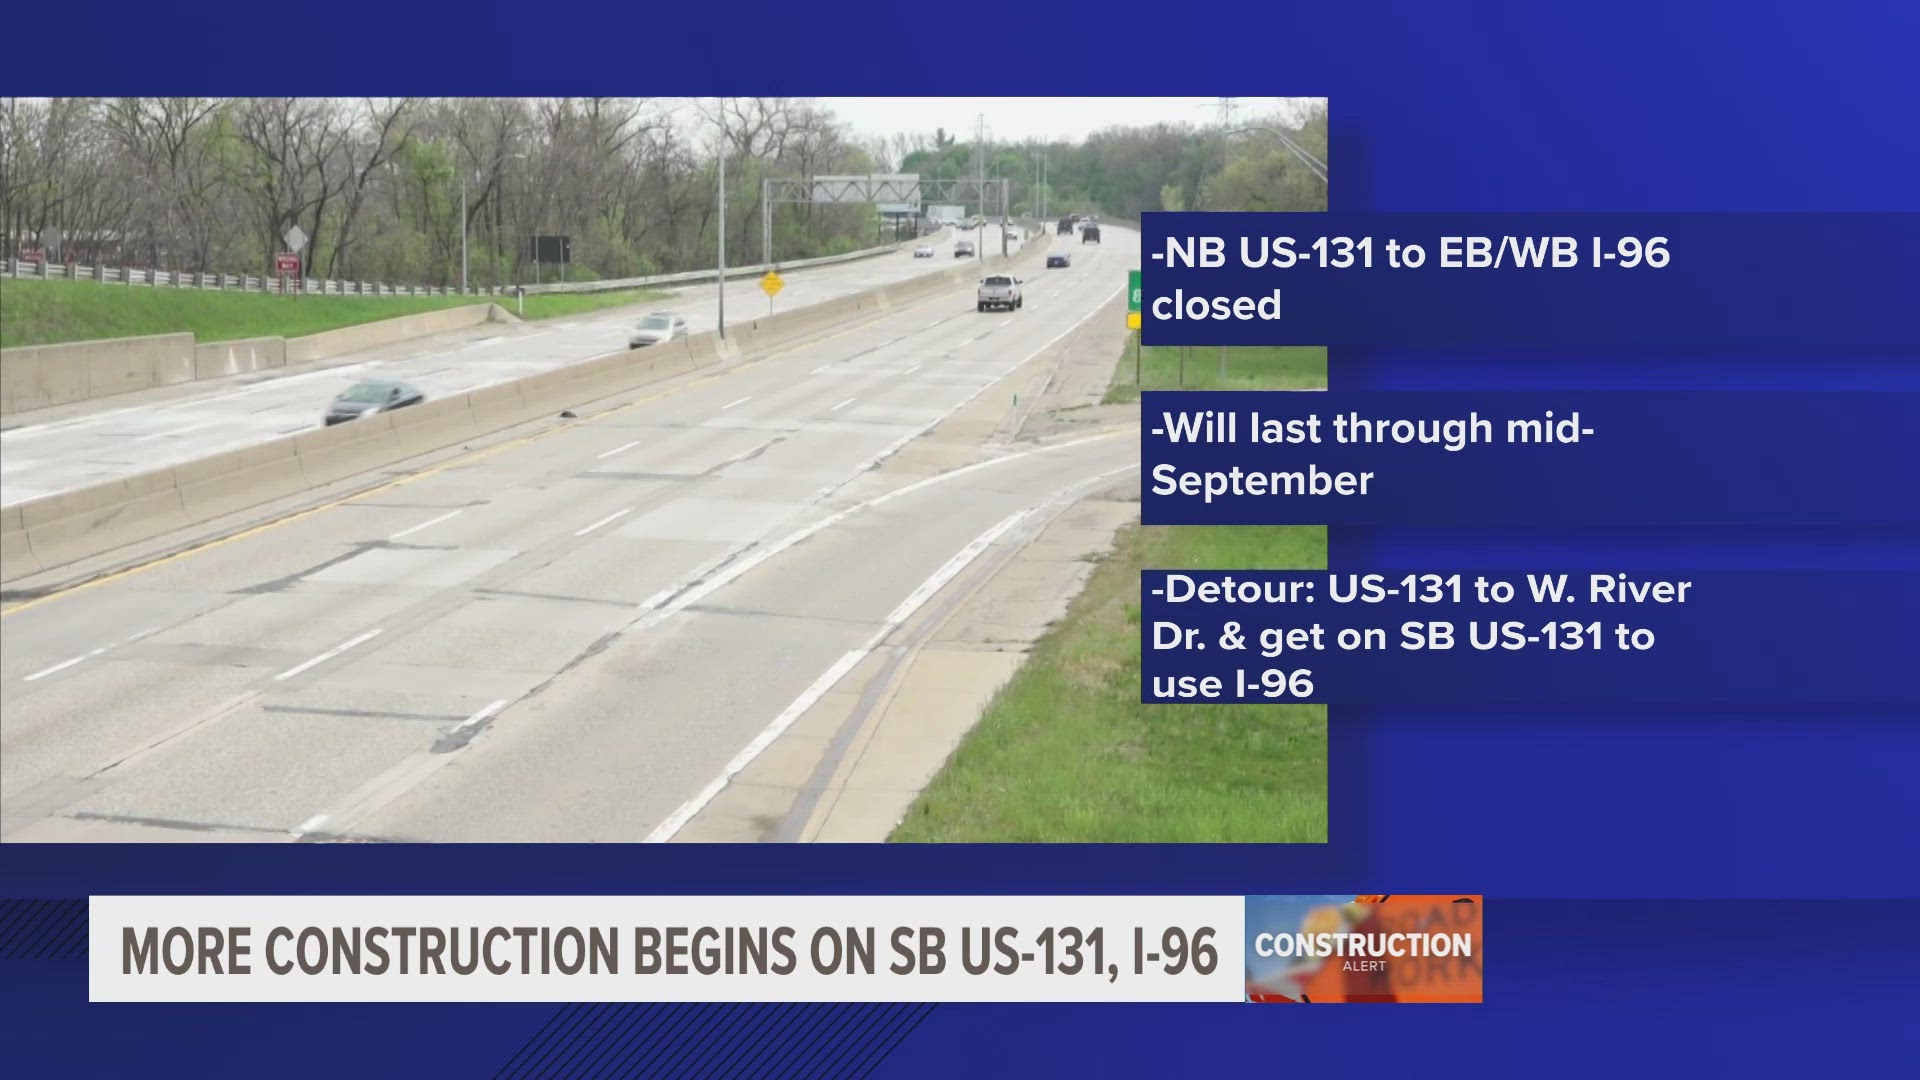 Make sure to pack your patience driving as construction season continues to pick up with more projects potentially impacting your driving plans.